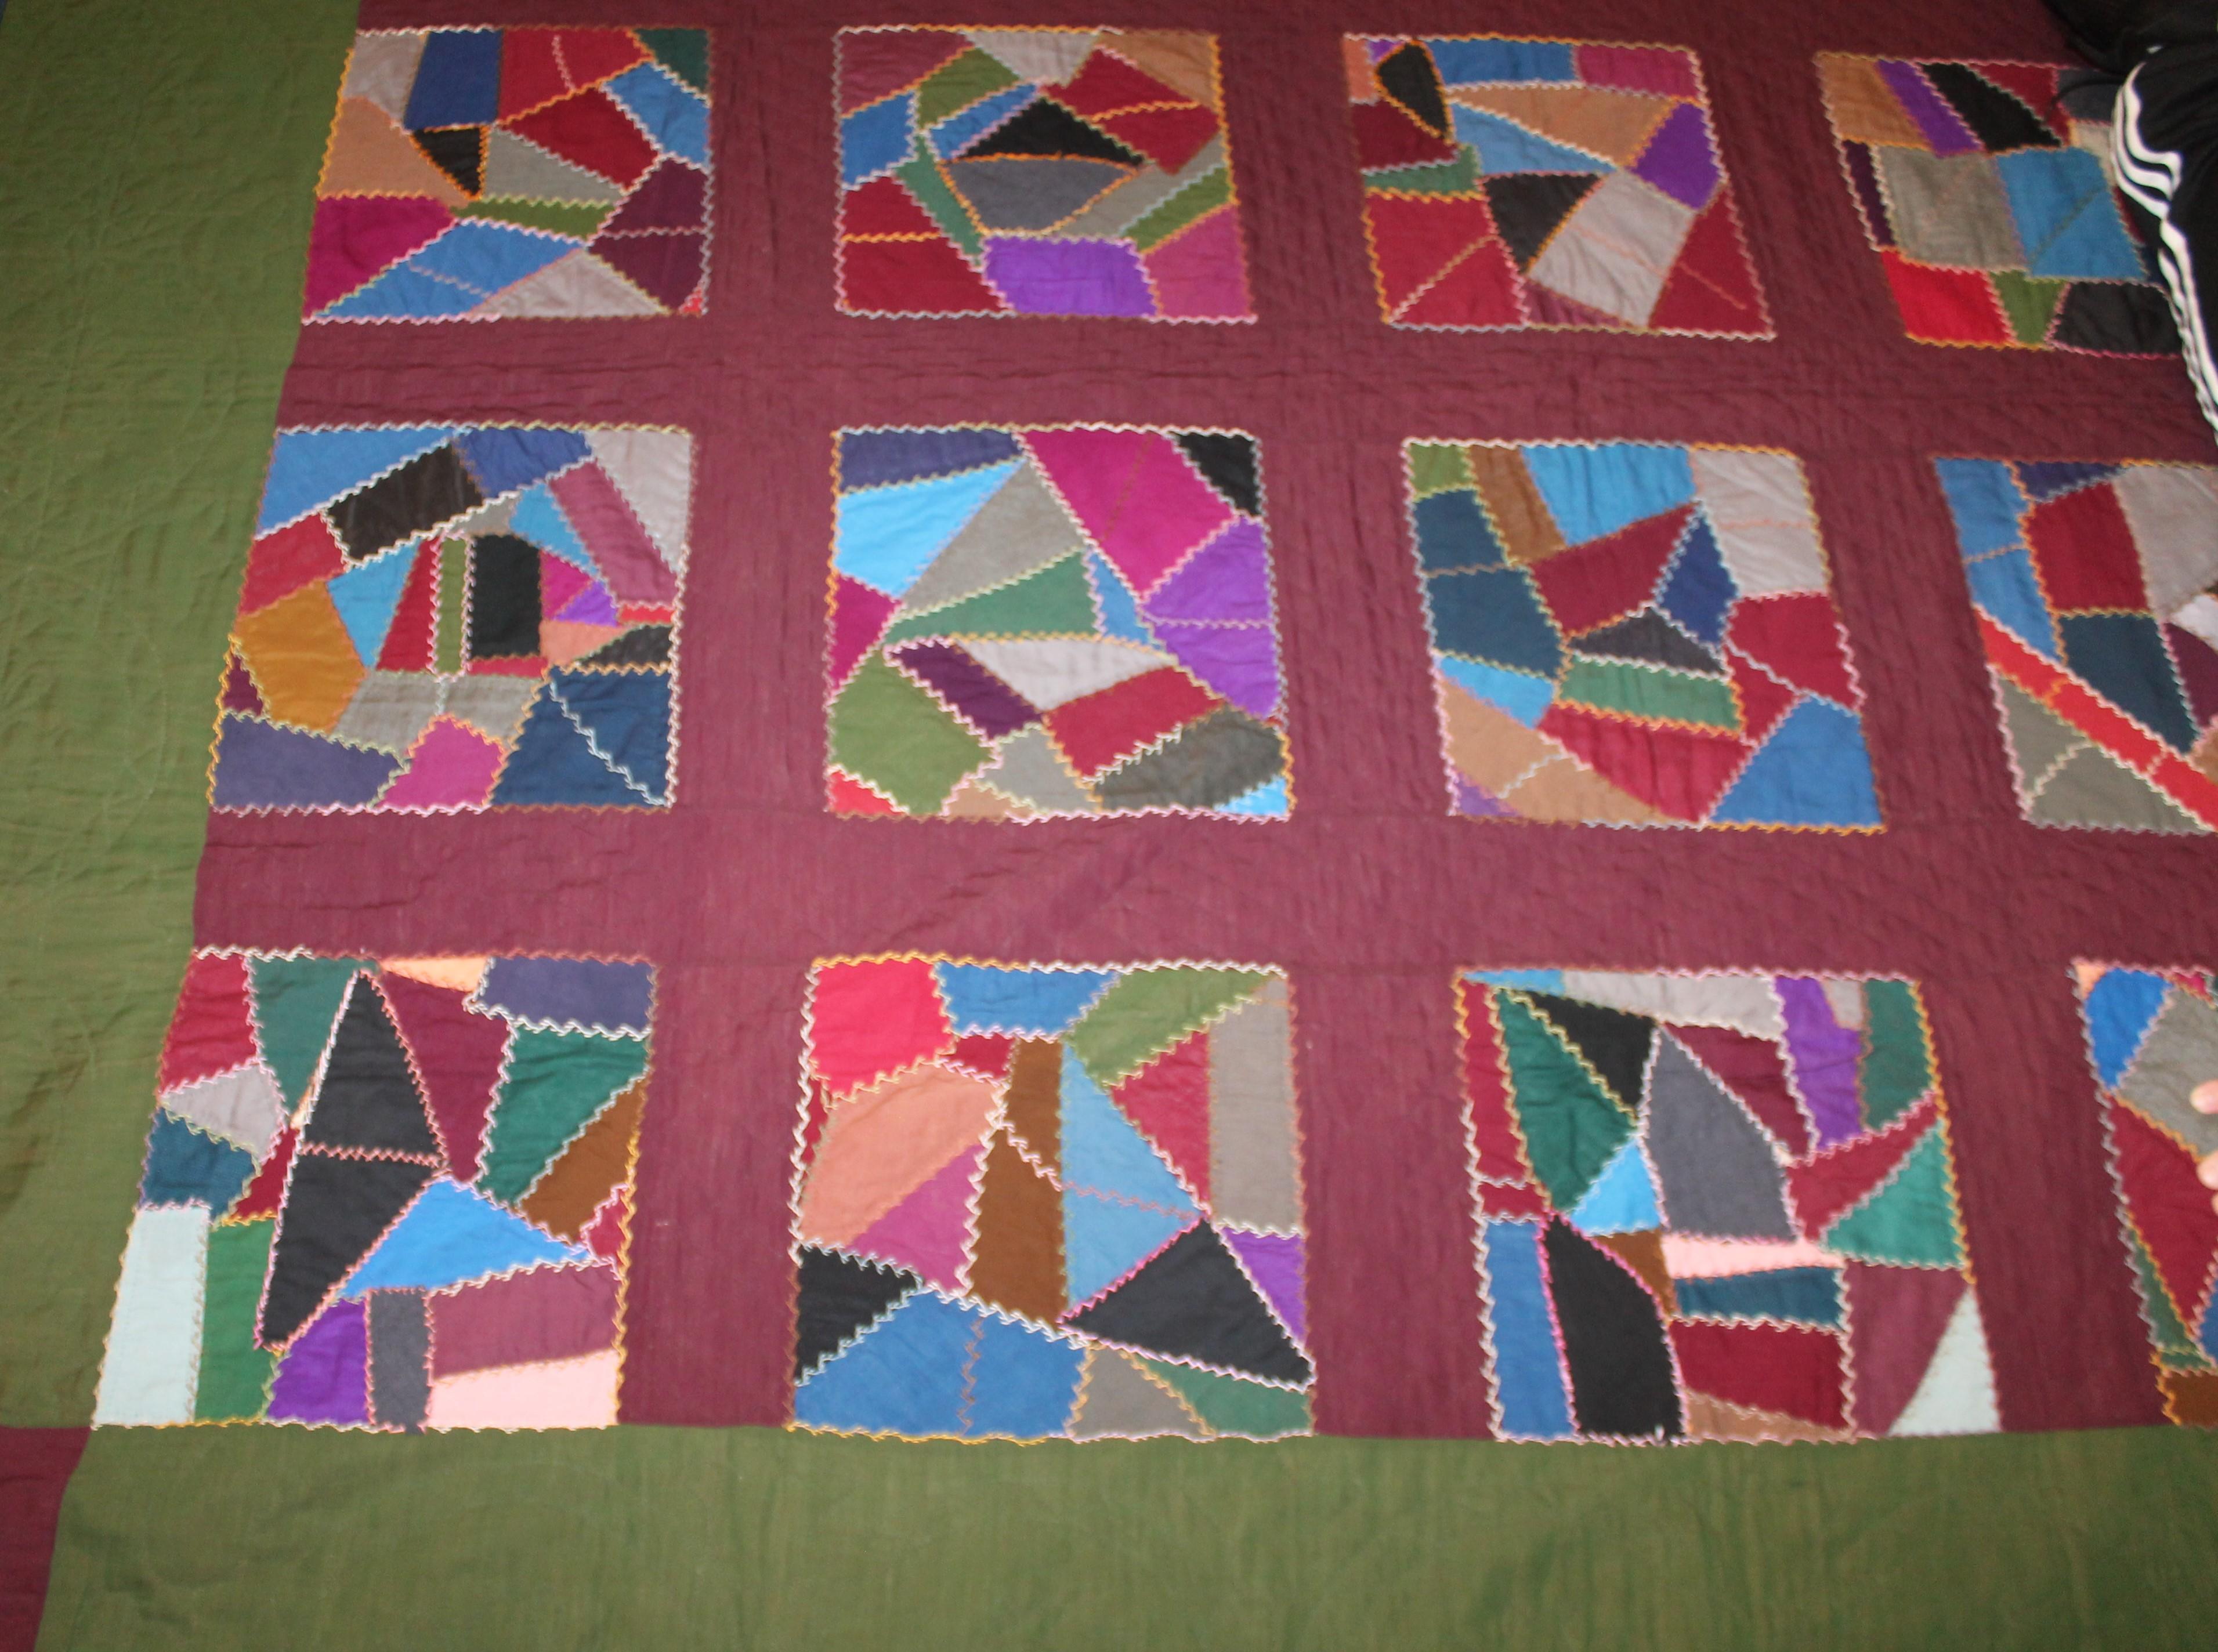 20th Century Amish 1920s Wool Contained Crazy Quilt Lancaster Co.Pa. For Sale